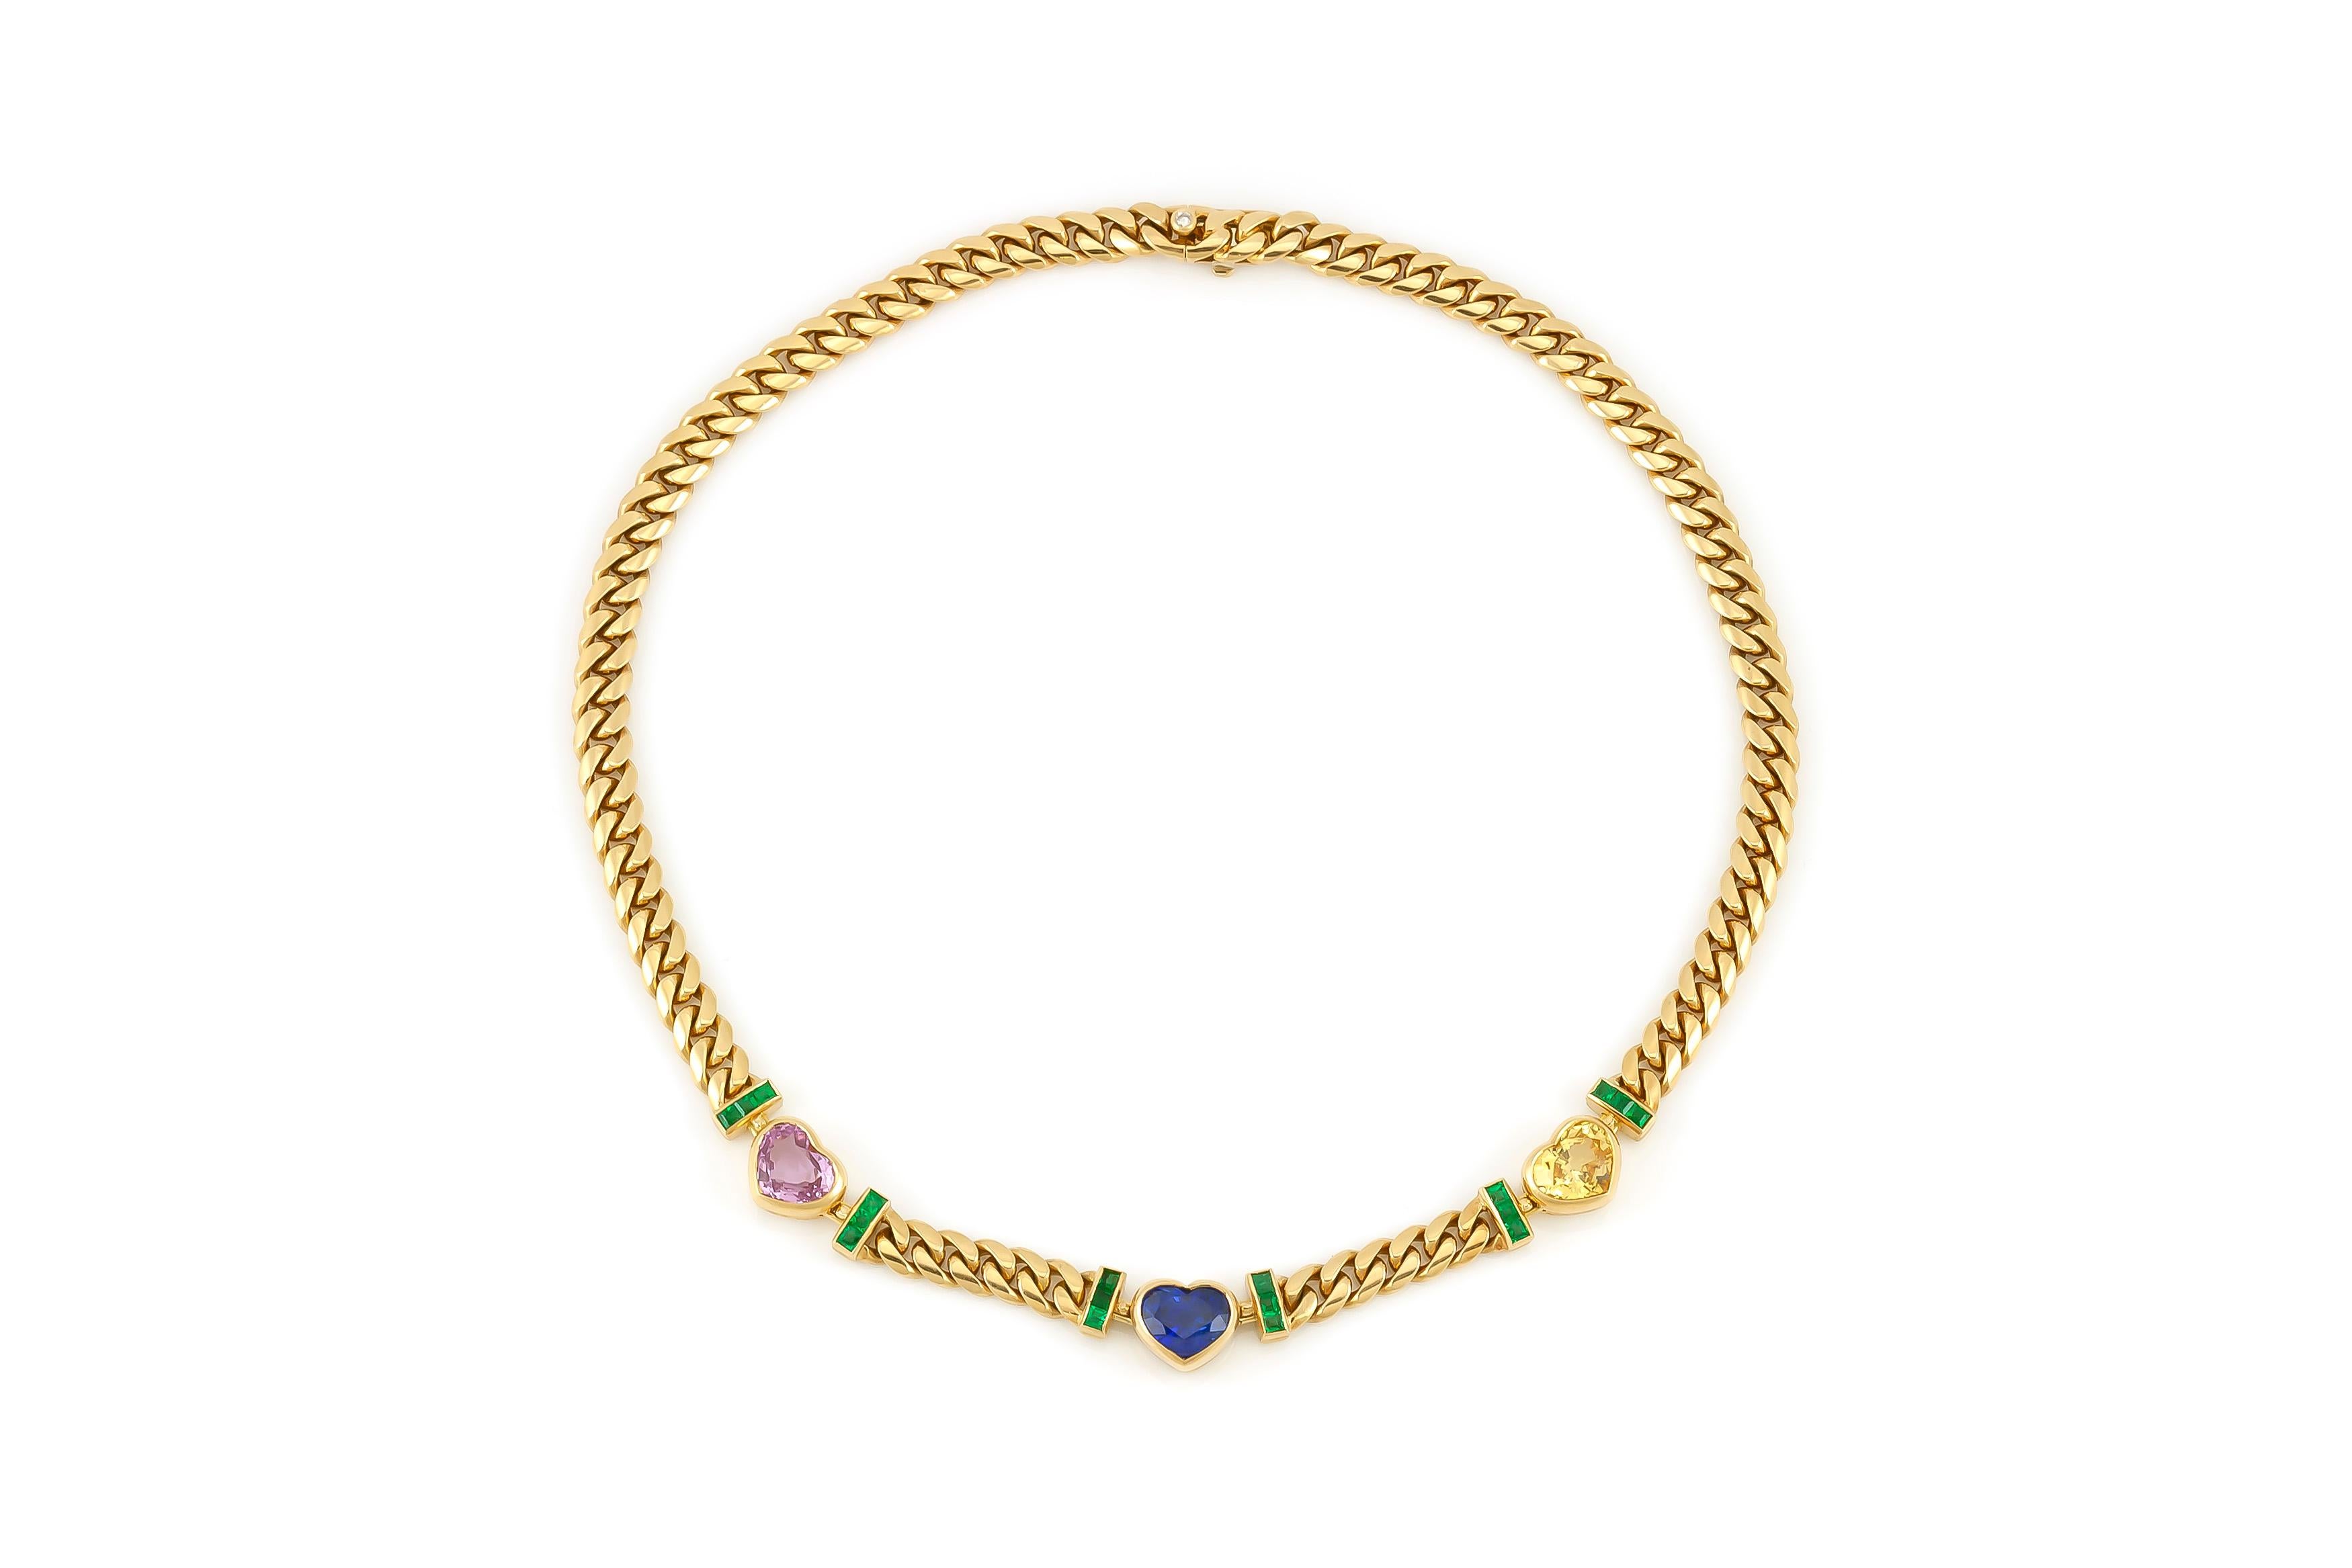 Finely crafted in 18k yellow gold with 3 Sapphire hearts.
The center blue Sapphire is GIA certified, Burma origin.
Signed by Bvlgari
Circa 1970s